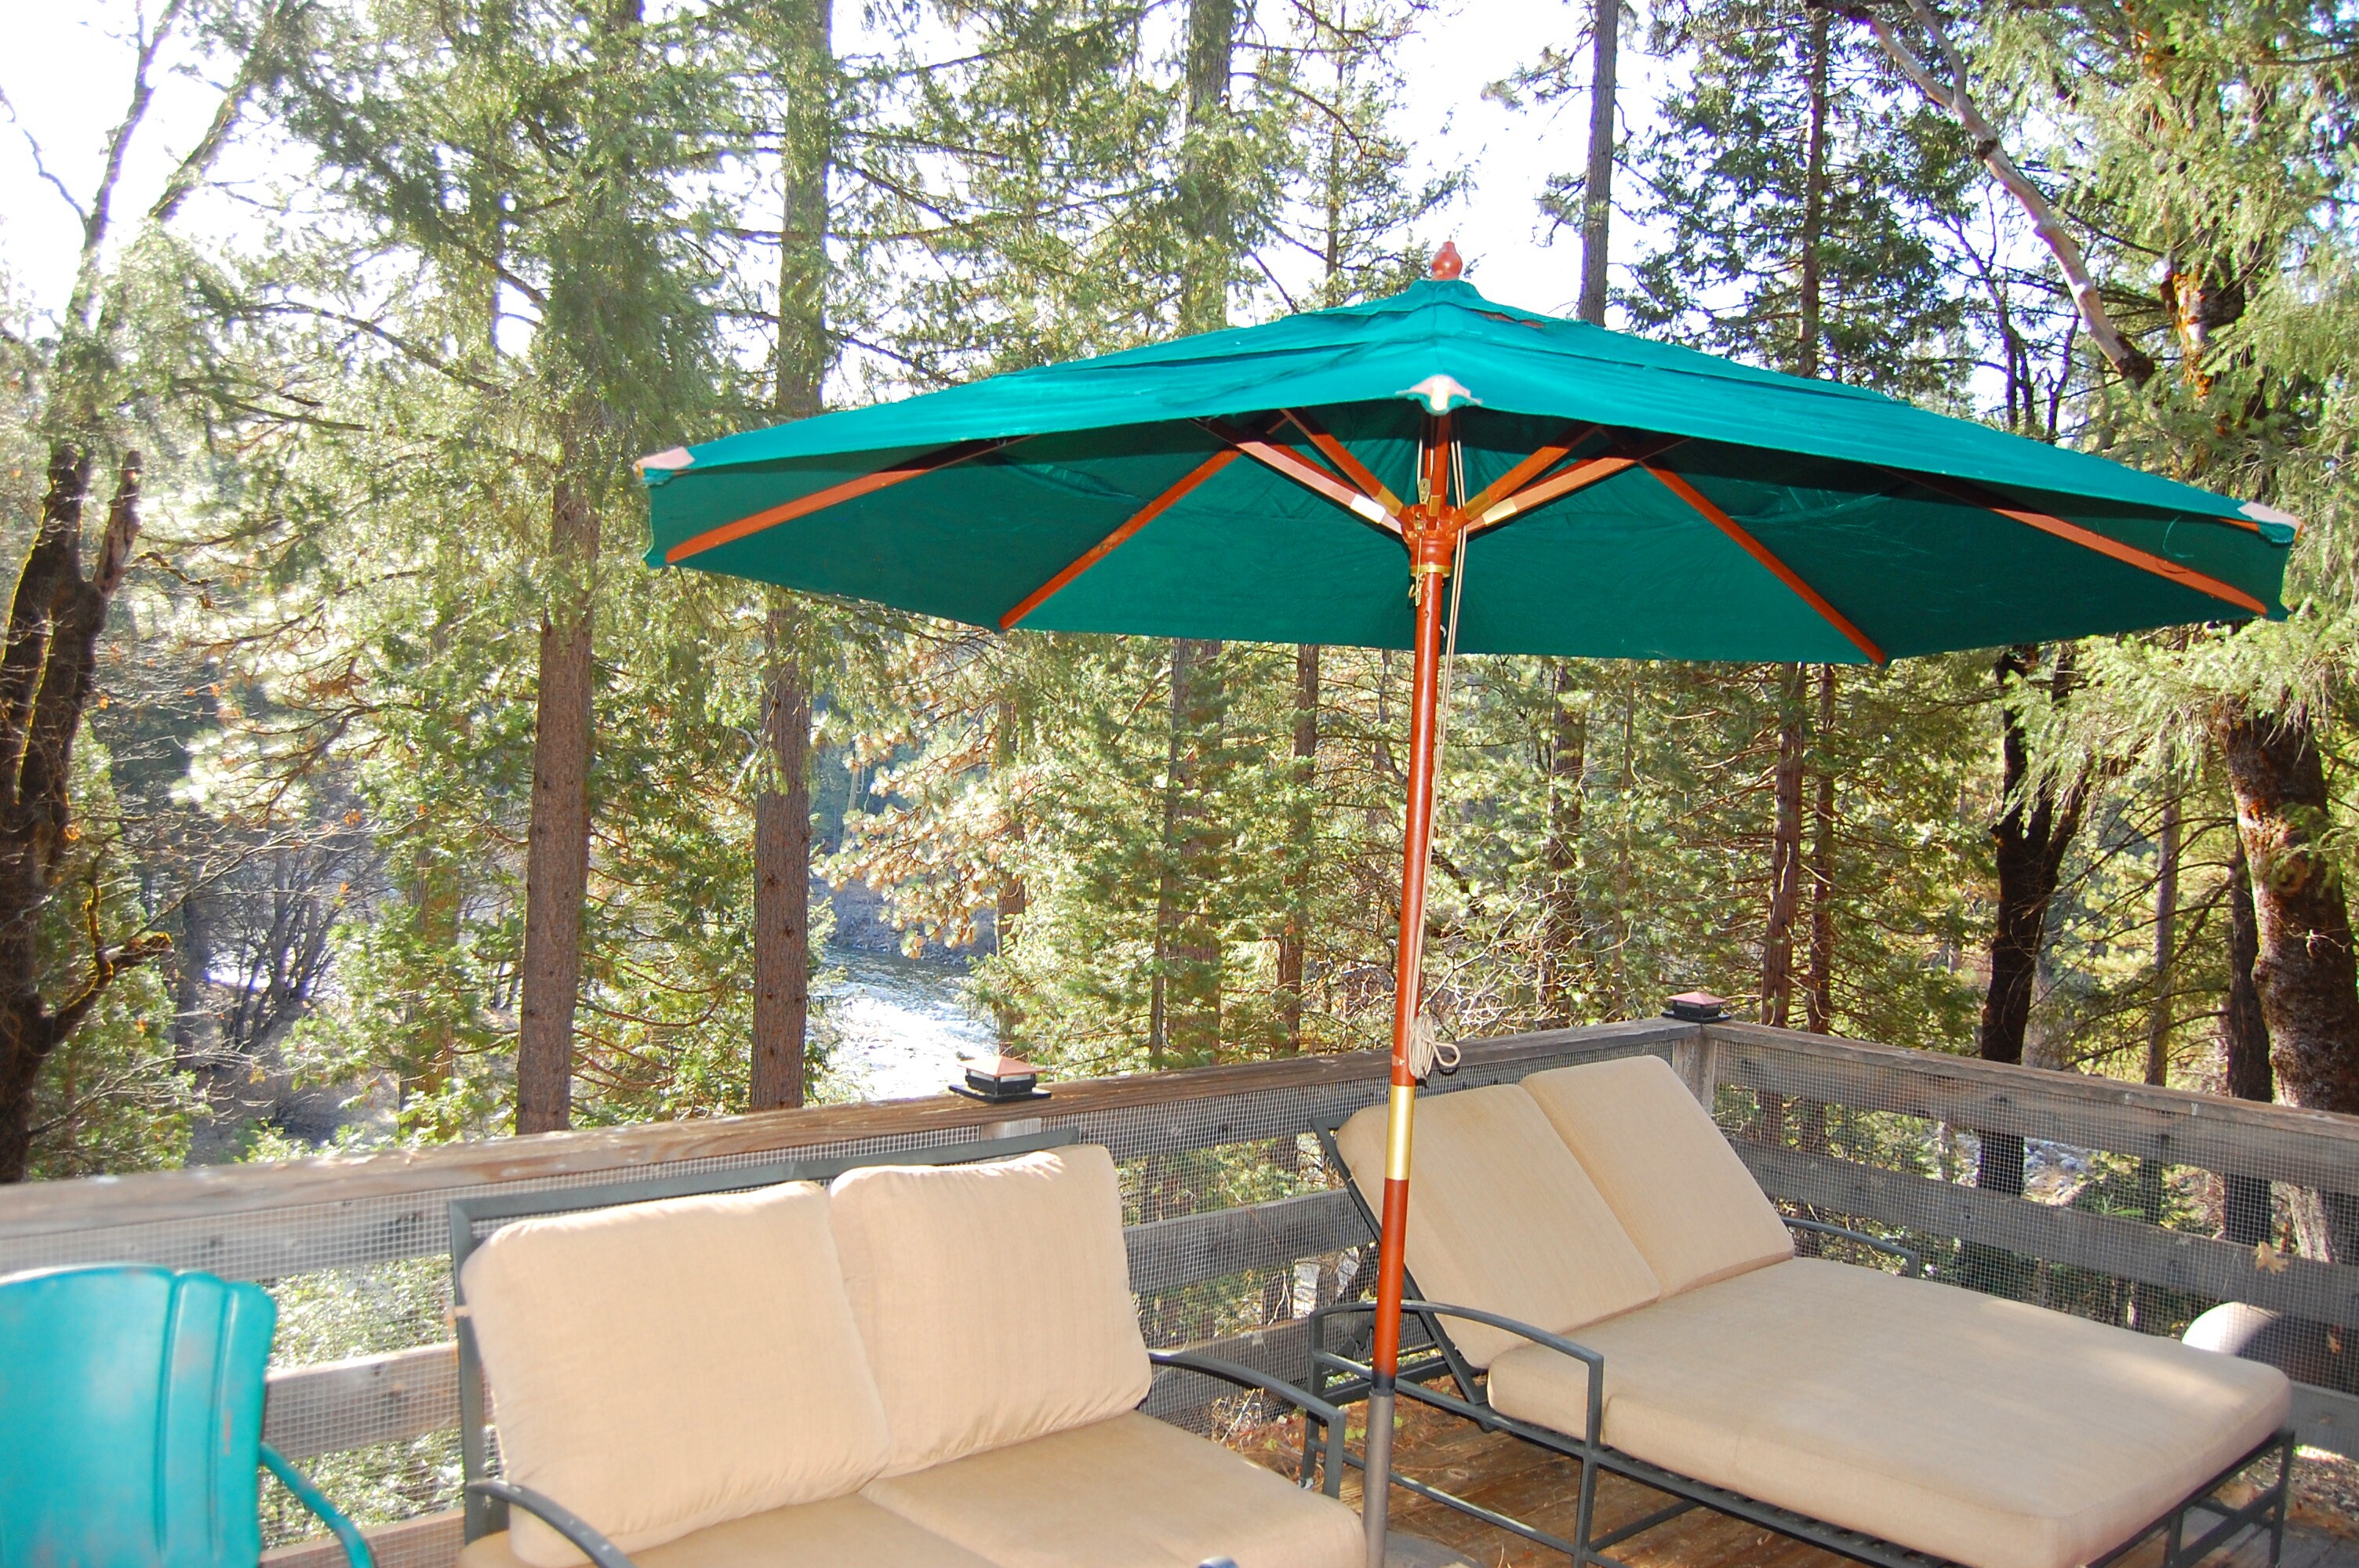 Relax in the double lounge under an umbrella listening to the flow of the South Fork of the Merced River (in background)